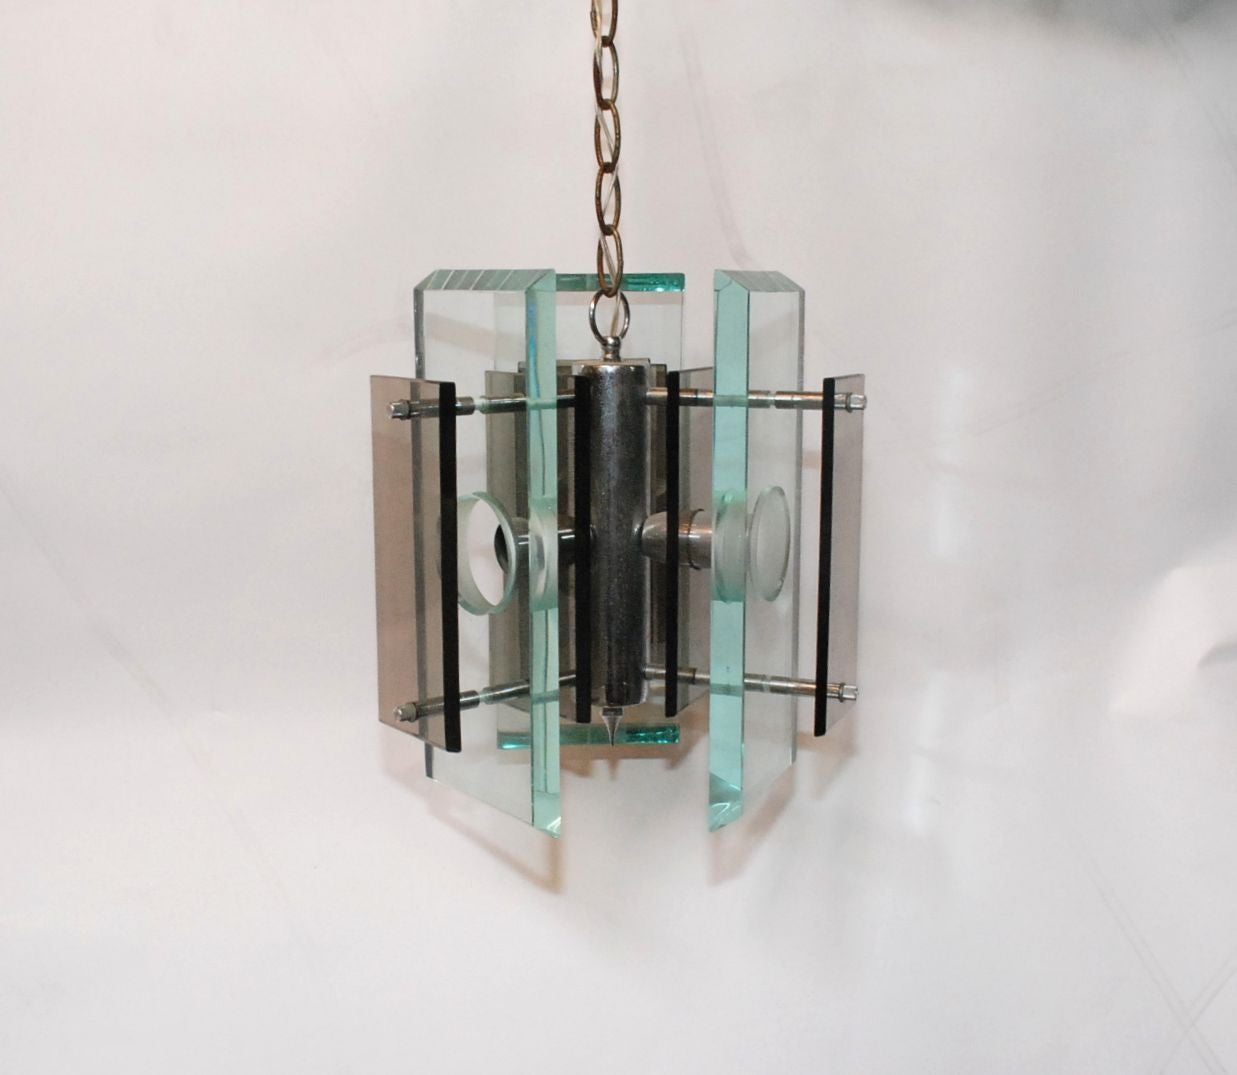 An elegant vintage Italian three-light chandelier in the manner of Fontana Arte. Fixture still has the European sockets but will be rewired to American standards when purchased (included in price). Made of chromed metal, green edged glass and dark